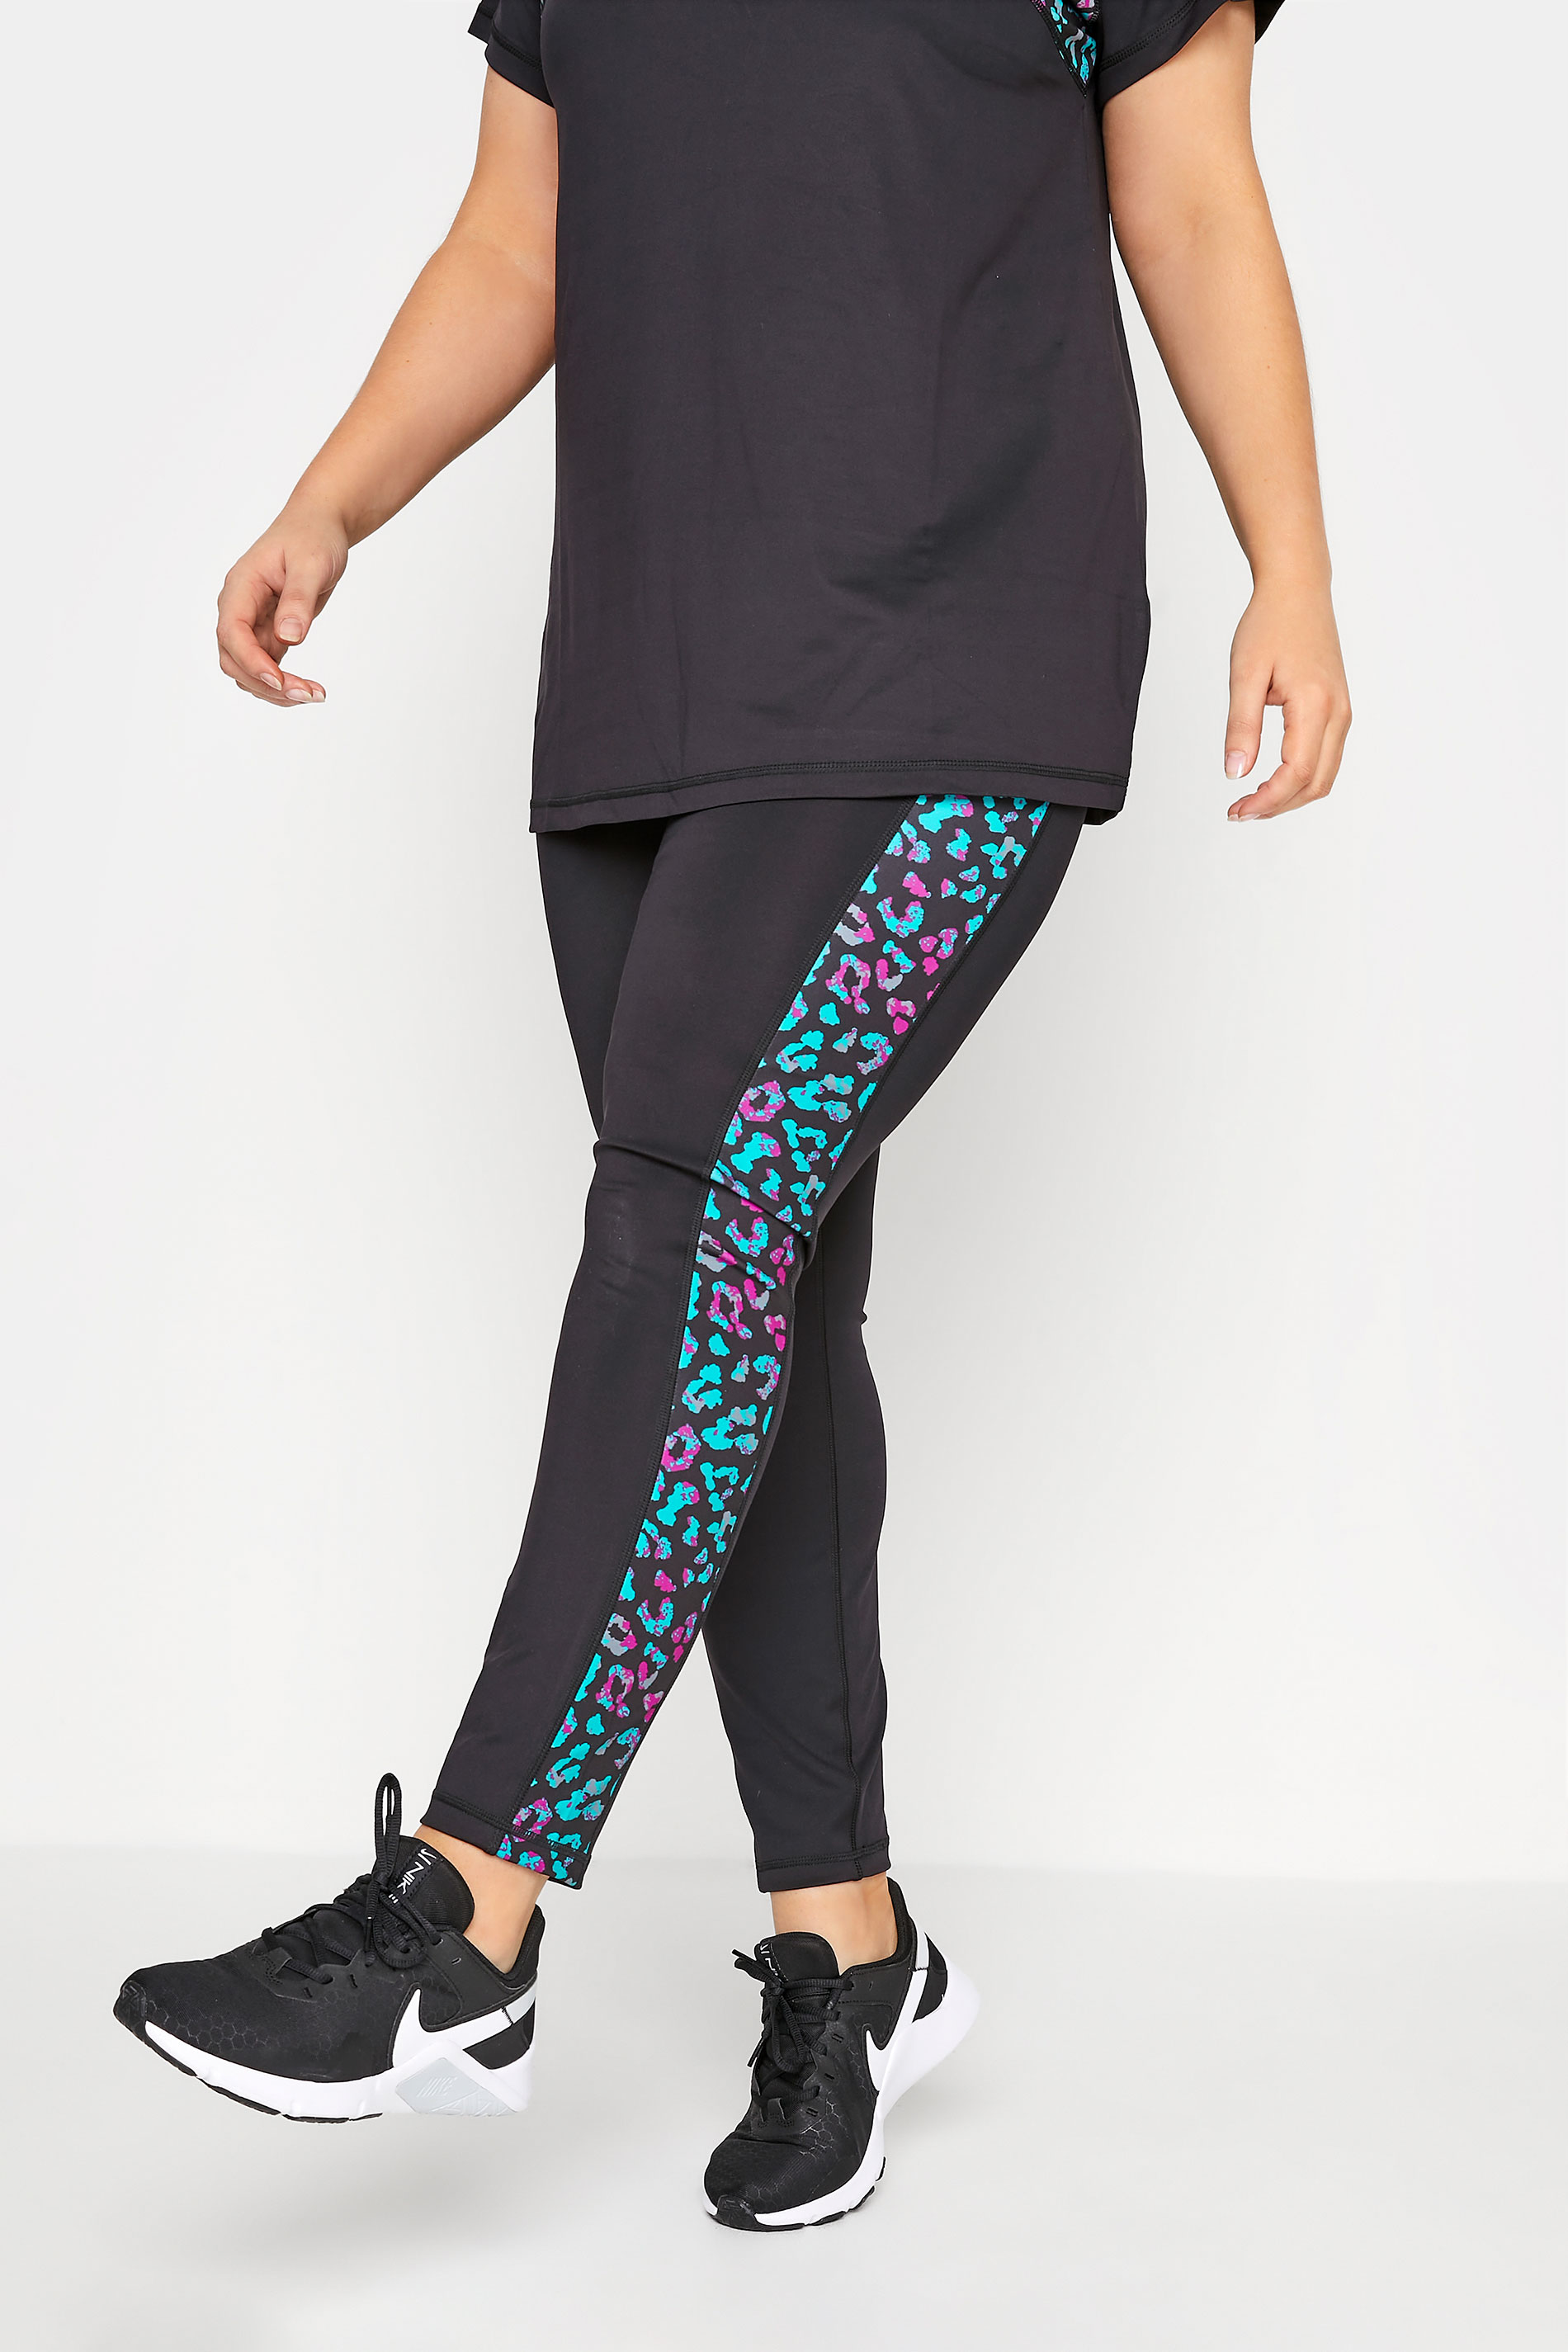 ACTIVE Plus Size Black Leopard Print Side Panel High Waisted Leggings | Yours Clothing 1